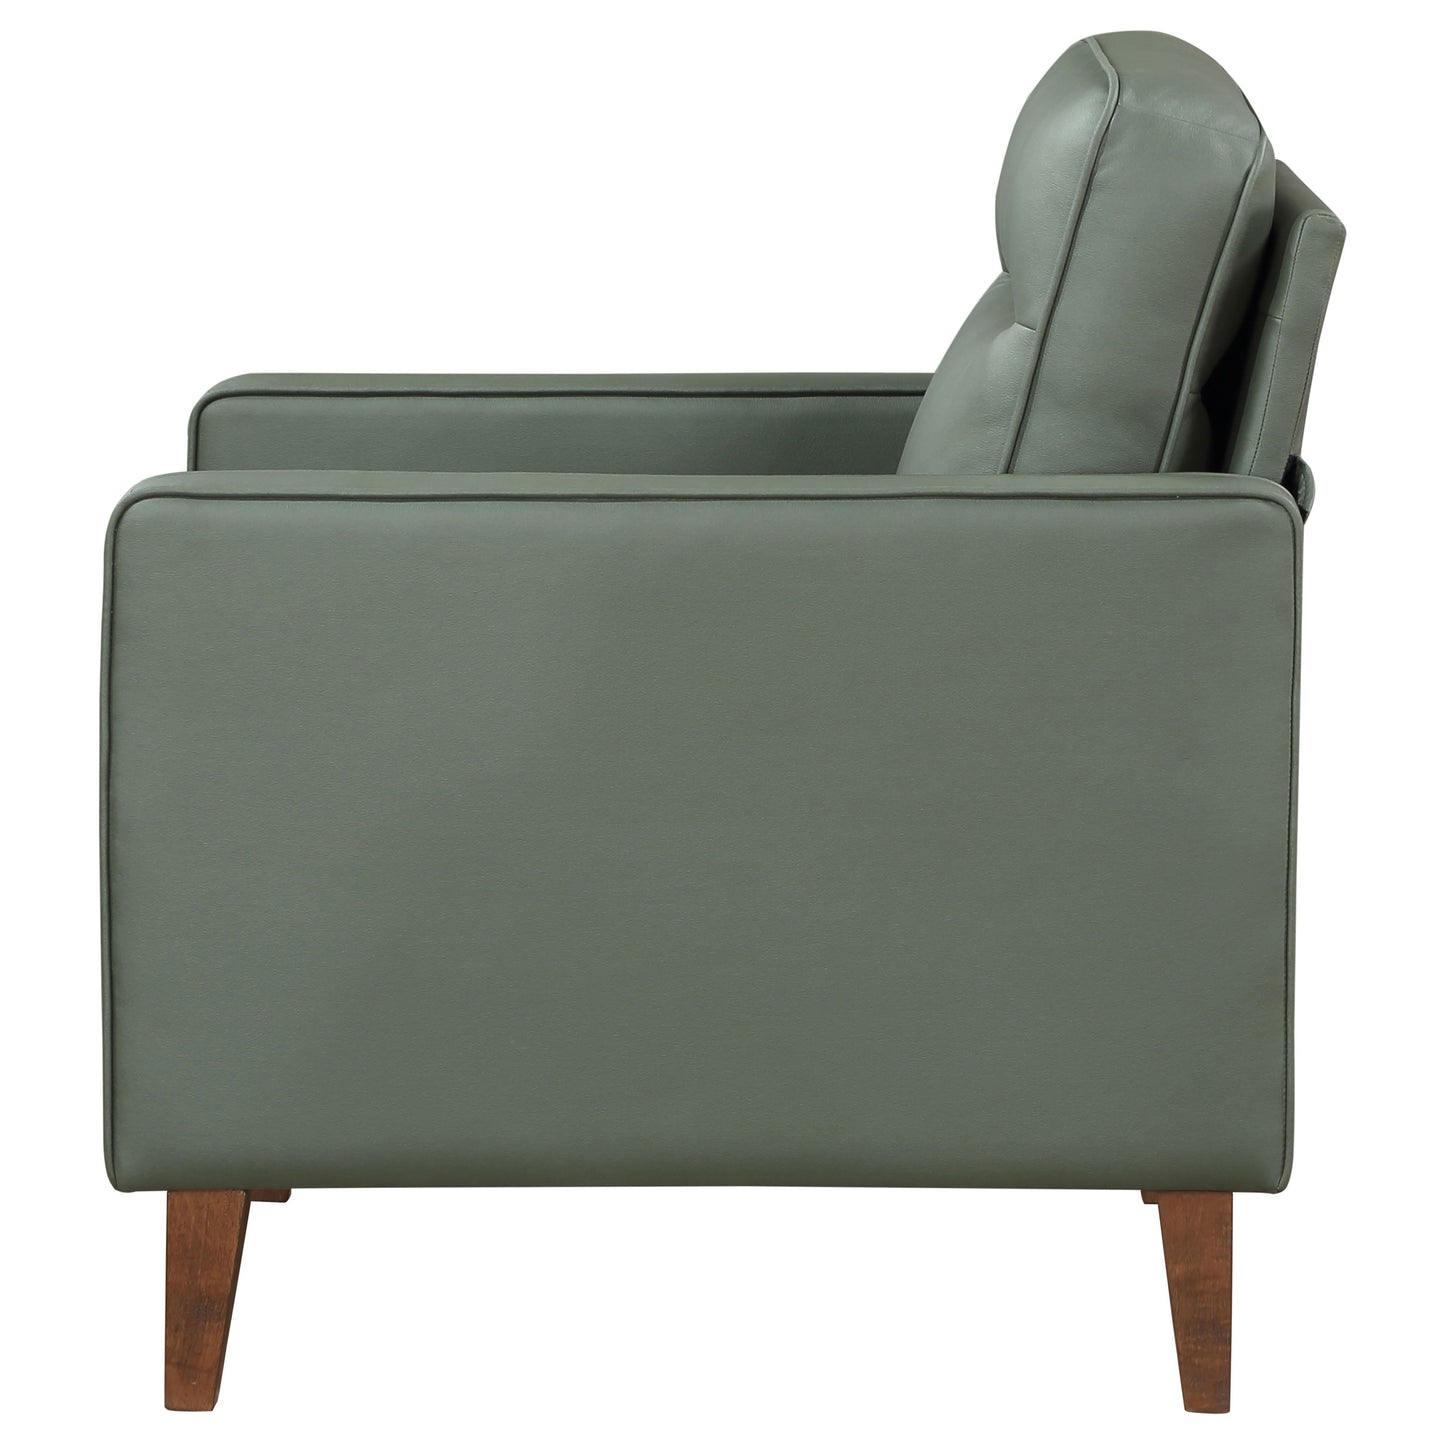 Jonah Upholstered Track Arm Accent Club Chair Green